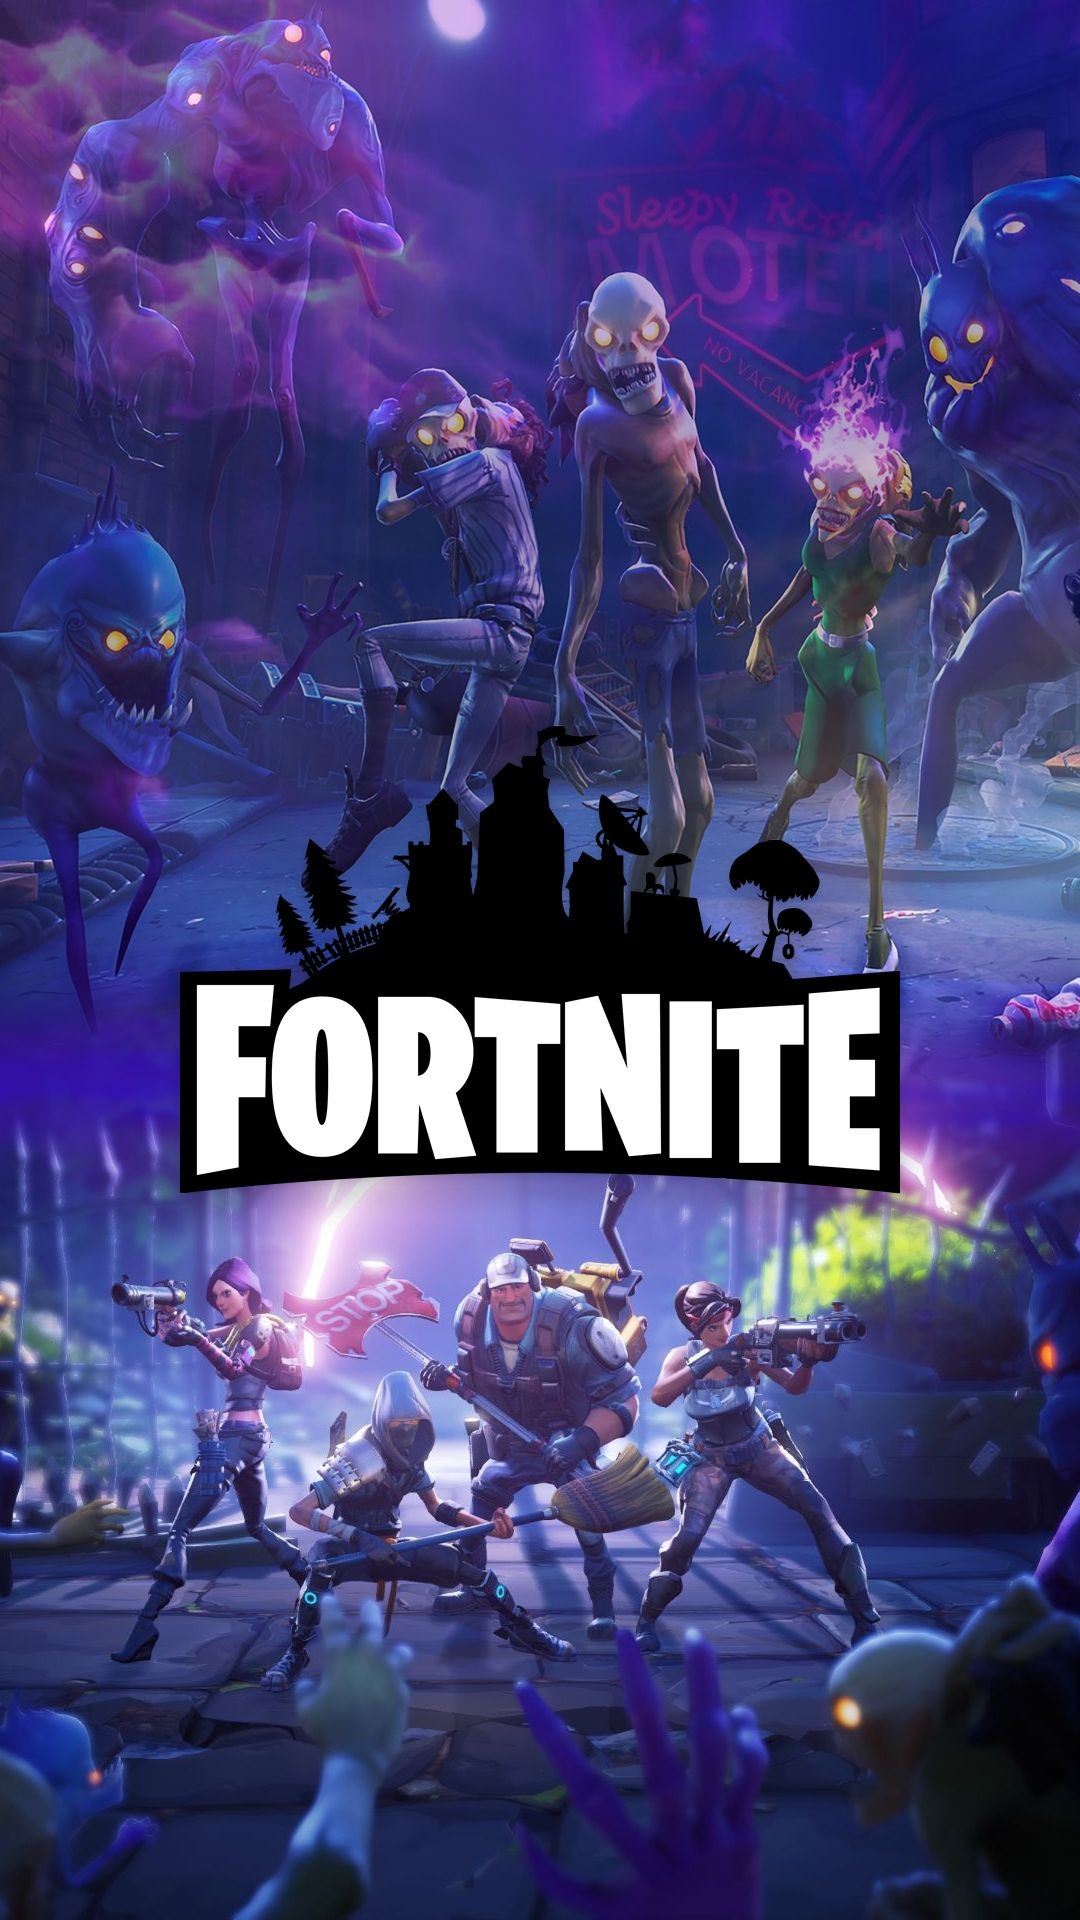 Fortnite Android Wallpaper with high-resolution 1080x1920 pixel. You can use this wallpaper for your Android backgrounds, Tablet, Samsung Screensavers, Mobile Phone Lock Screen and another Smartphones device